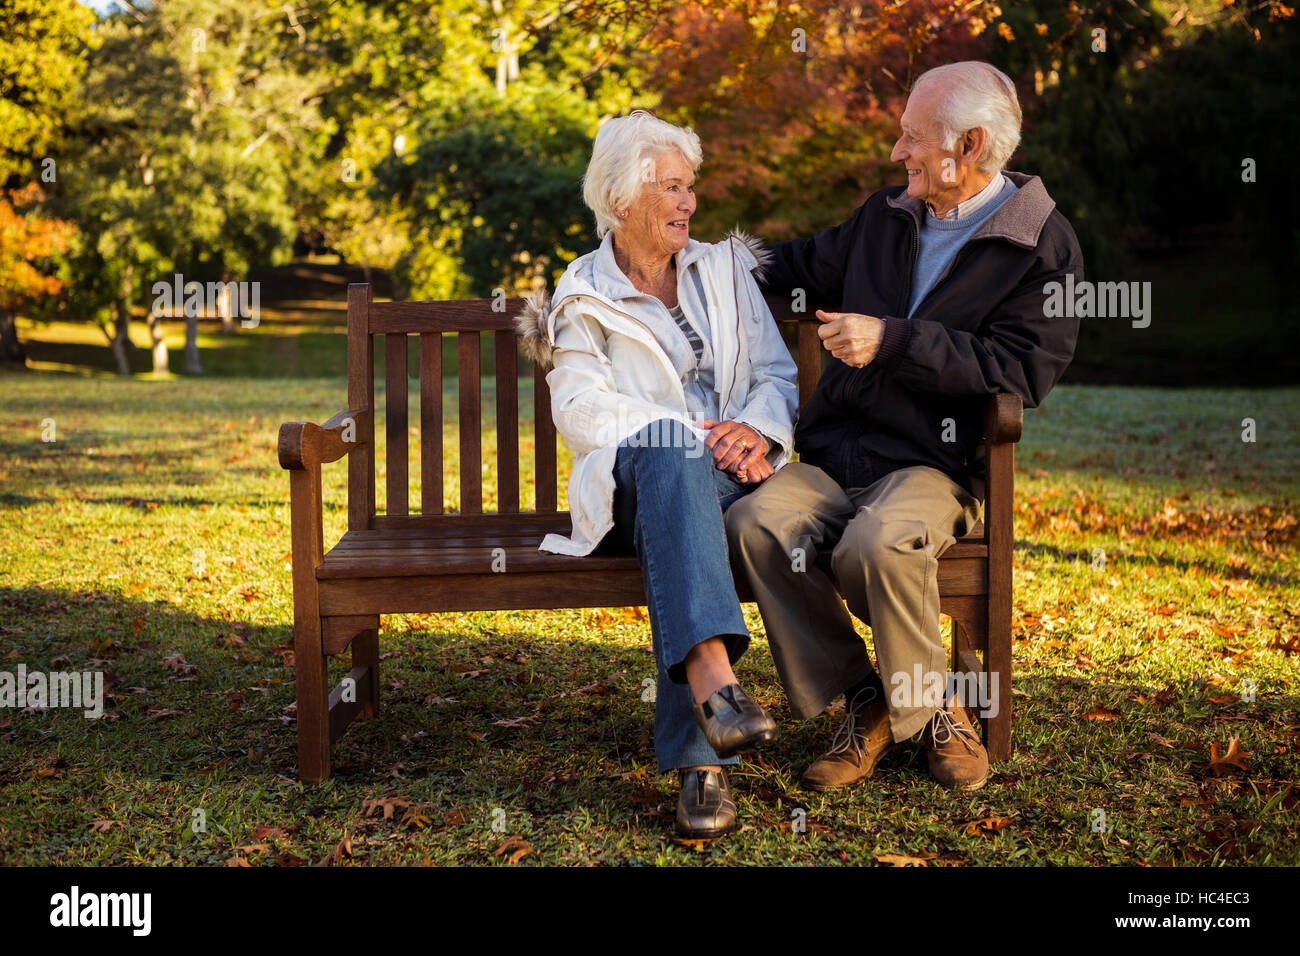 Elderly couple sitting on bench smiling at each other in park Stock Photo